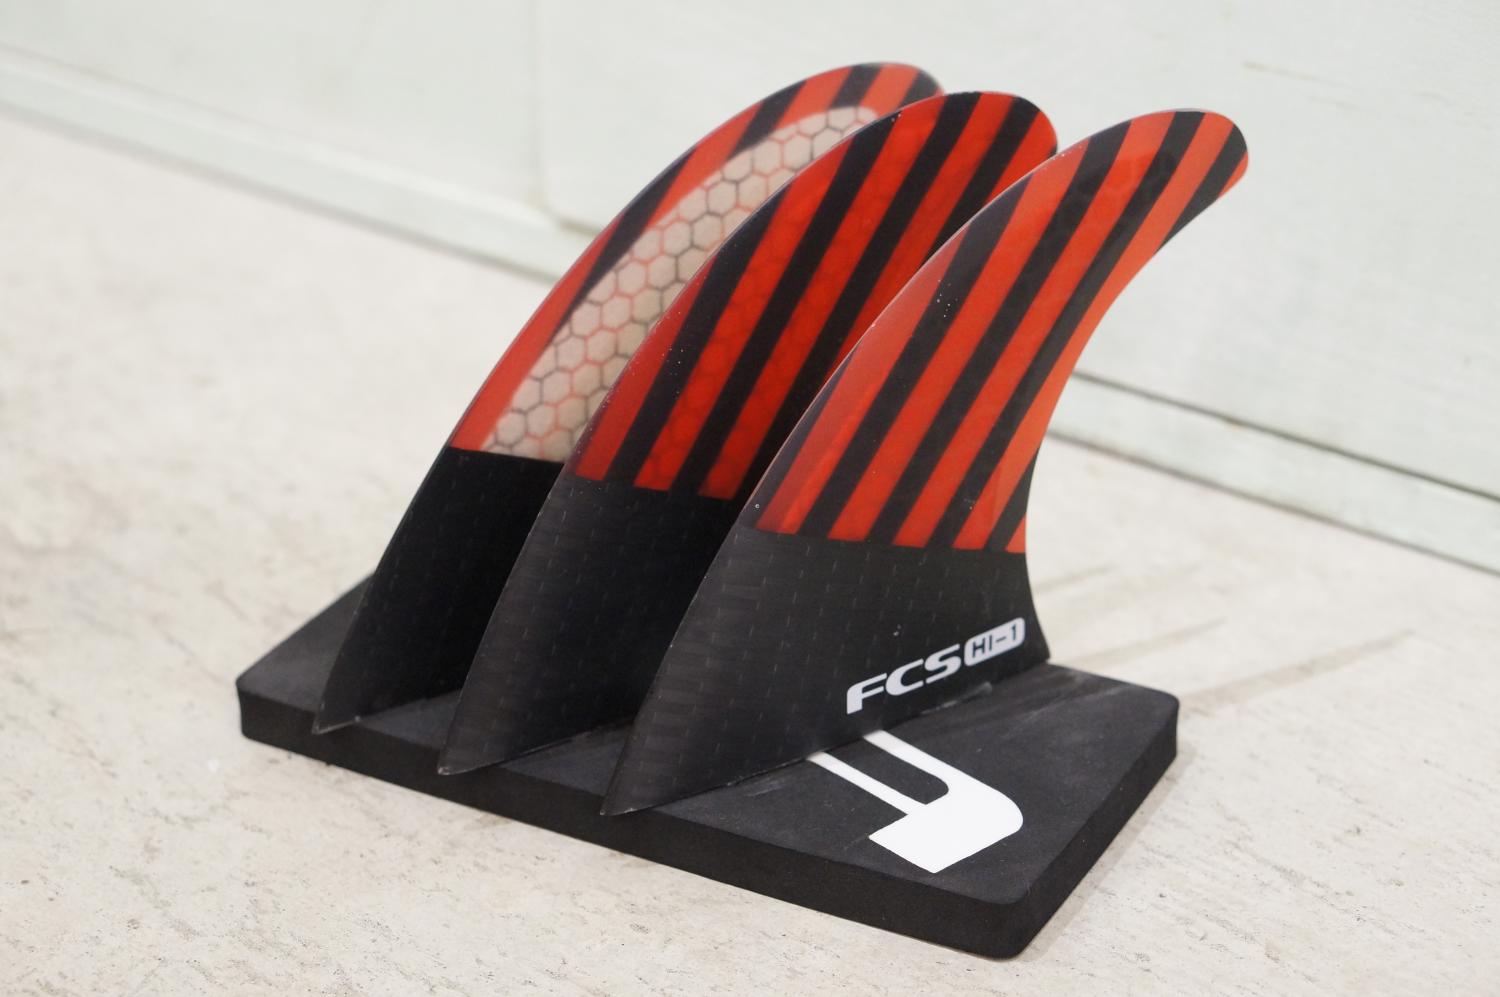 Recommended for SUP and performance Long ! HI-1FIN stock